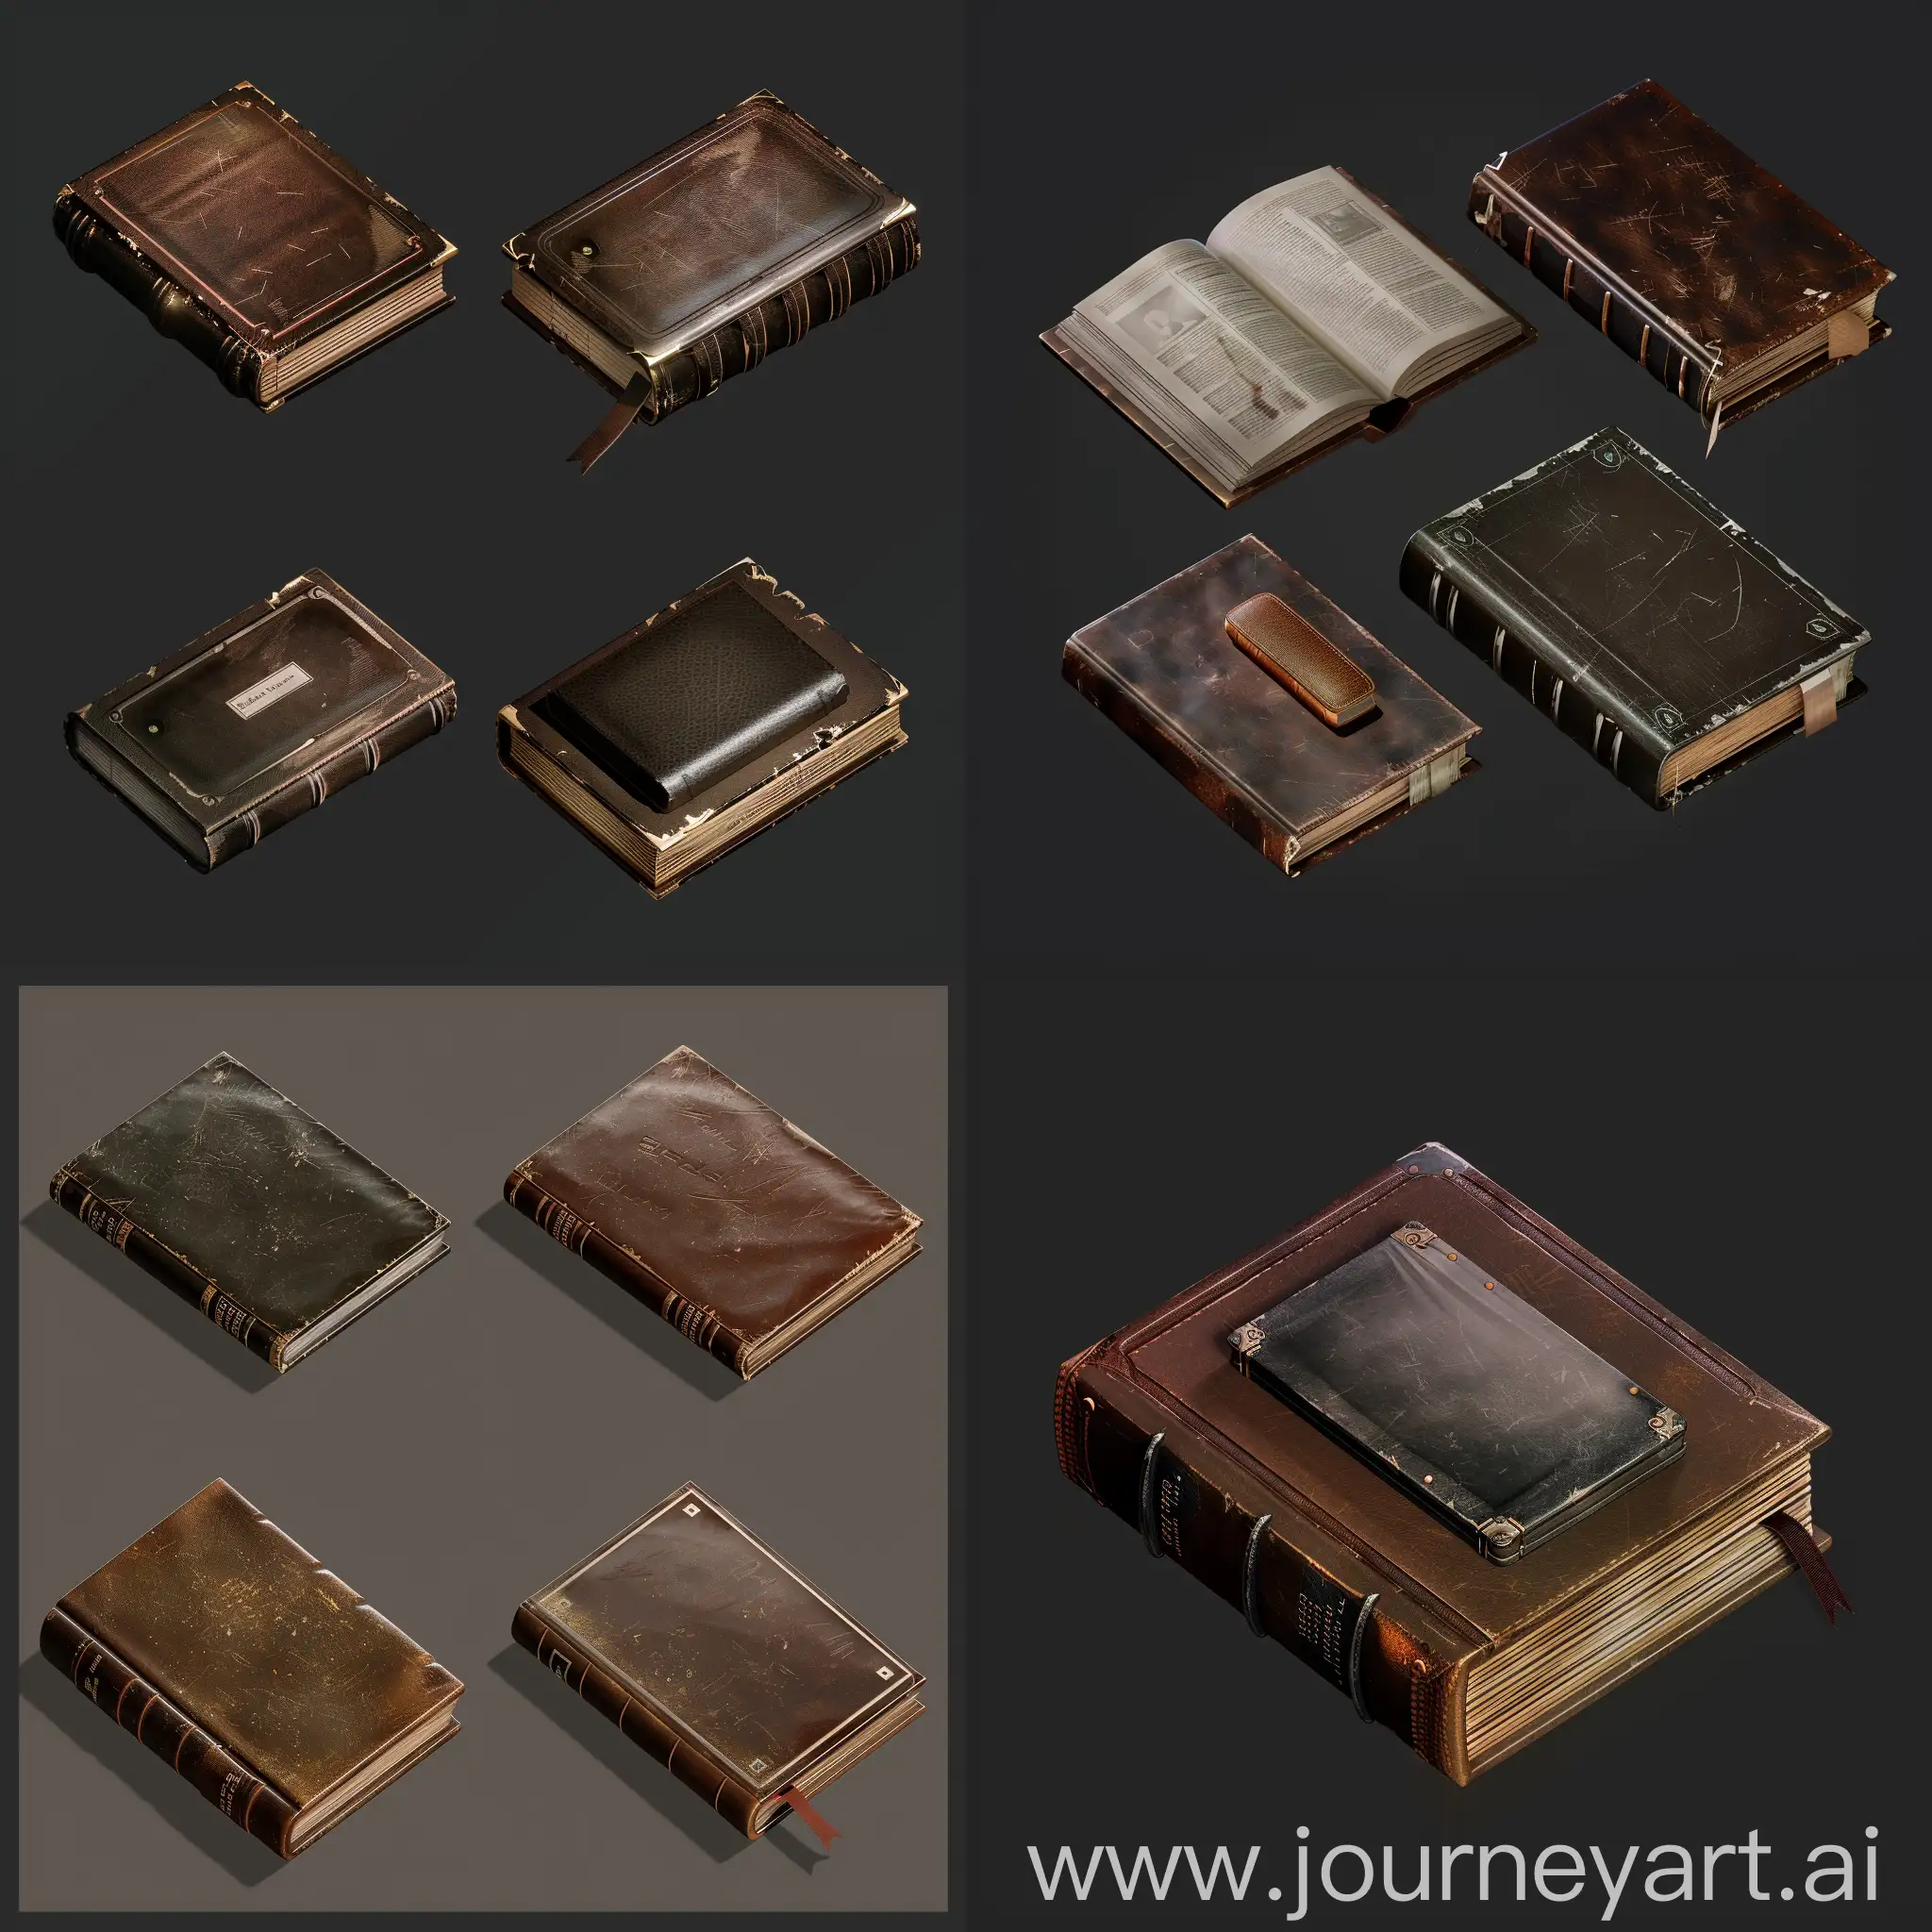 Isometric-Set-of-Realistic-Old-Worn-Books-with-Leather-Covers